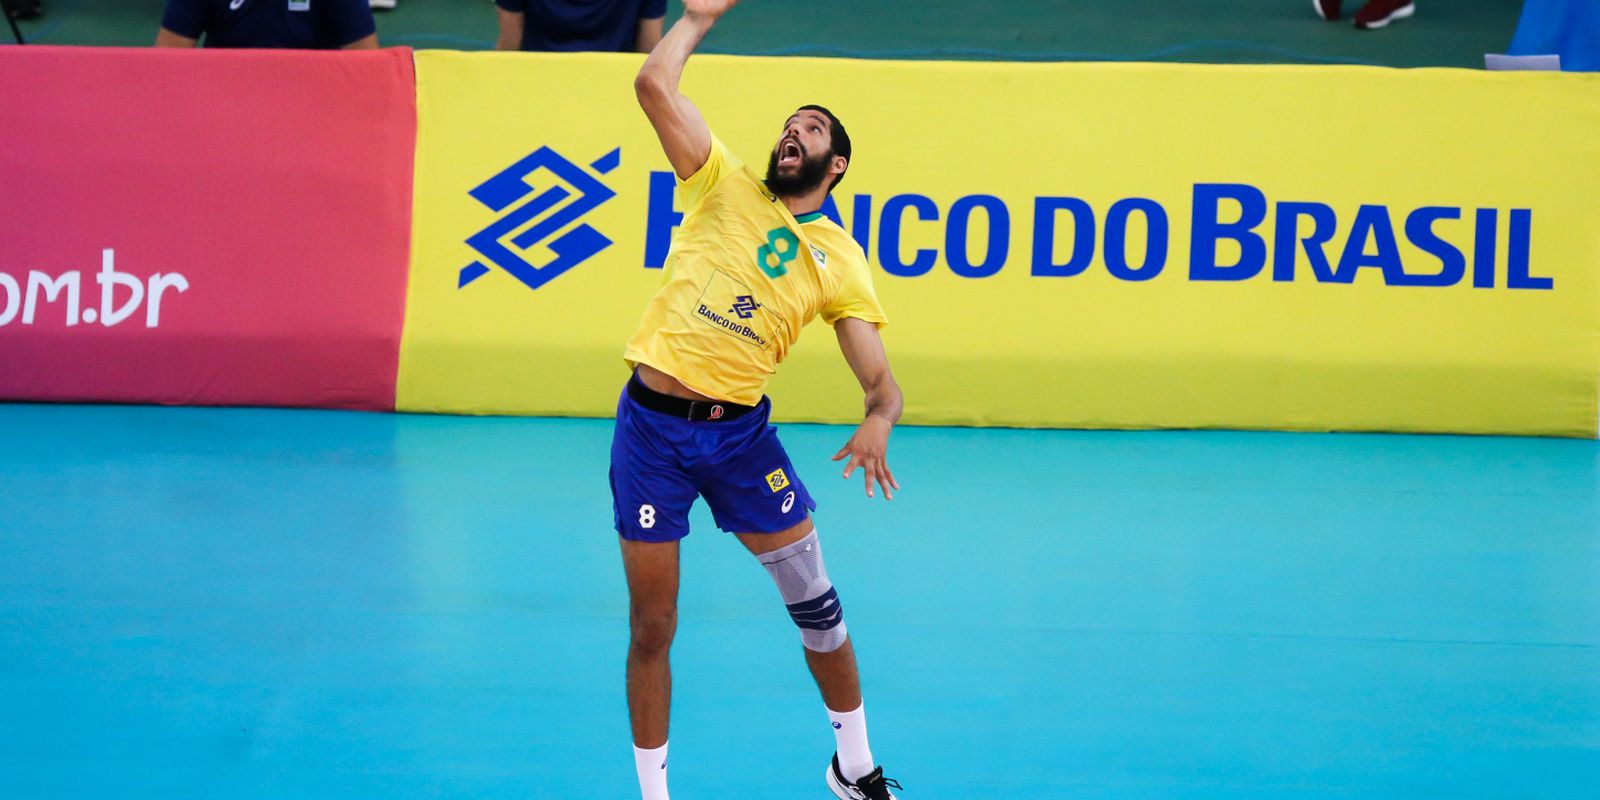 Government triggers AGU after volleyball player posts about Lula